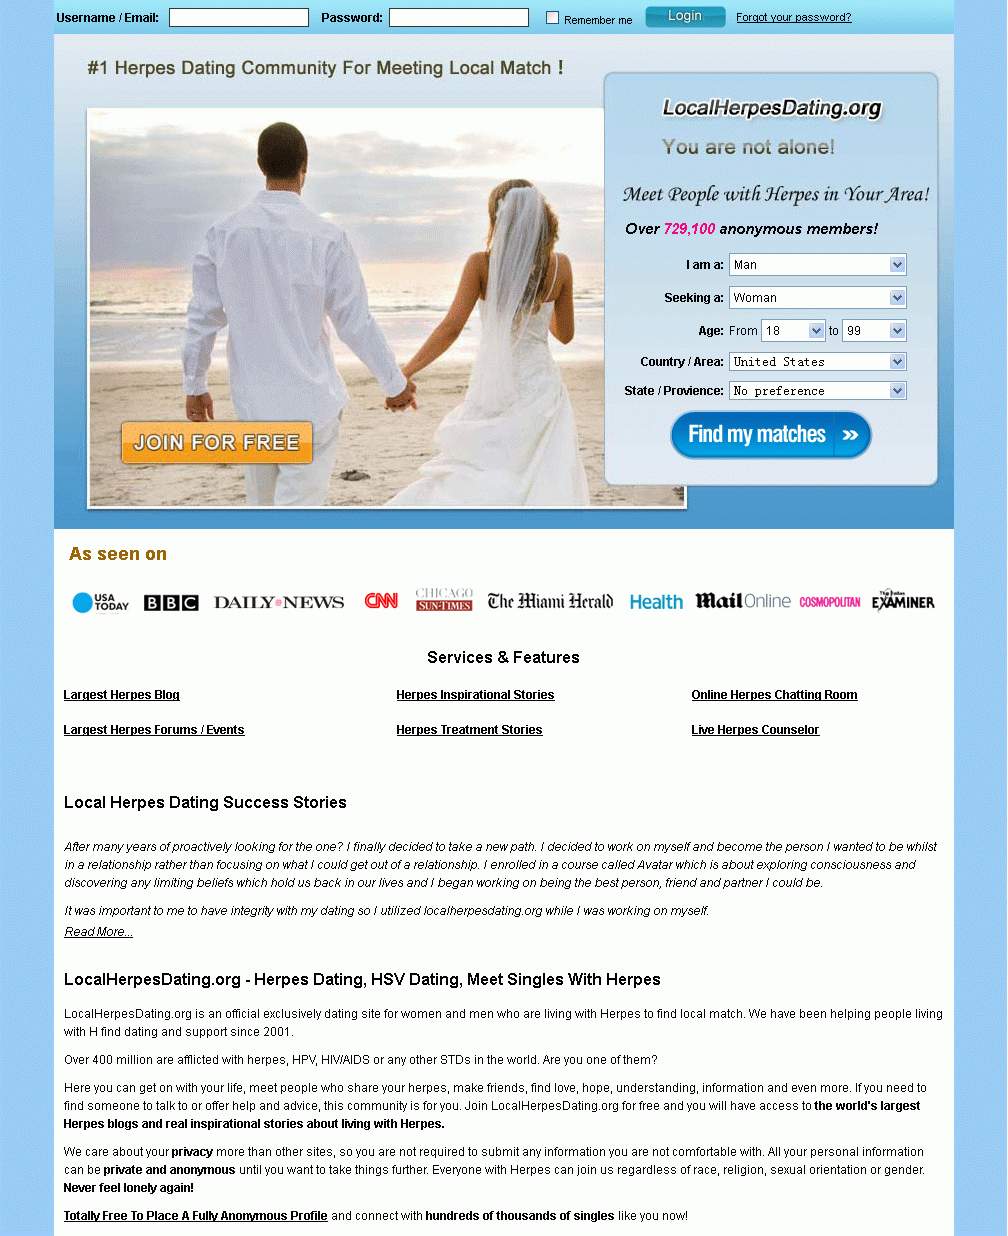 Newly Launched Herpes Dating Site LocalHerpesDating.org Helps Women and ...